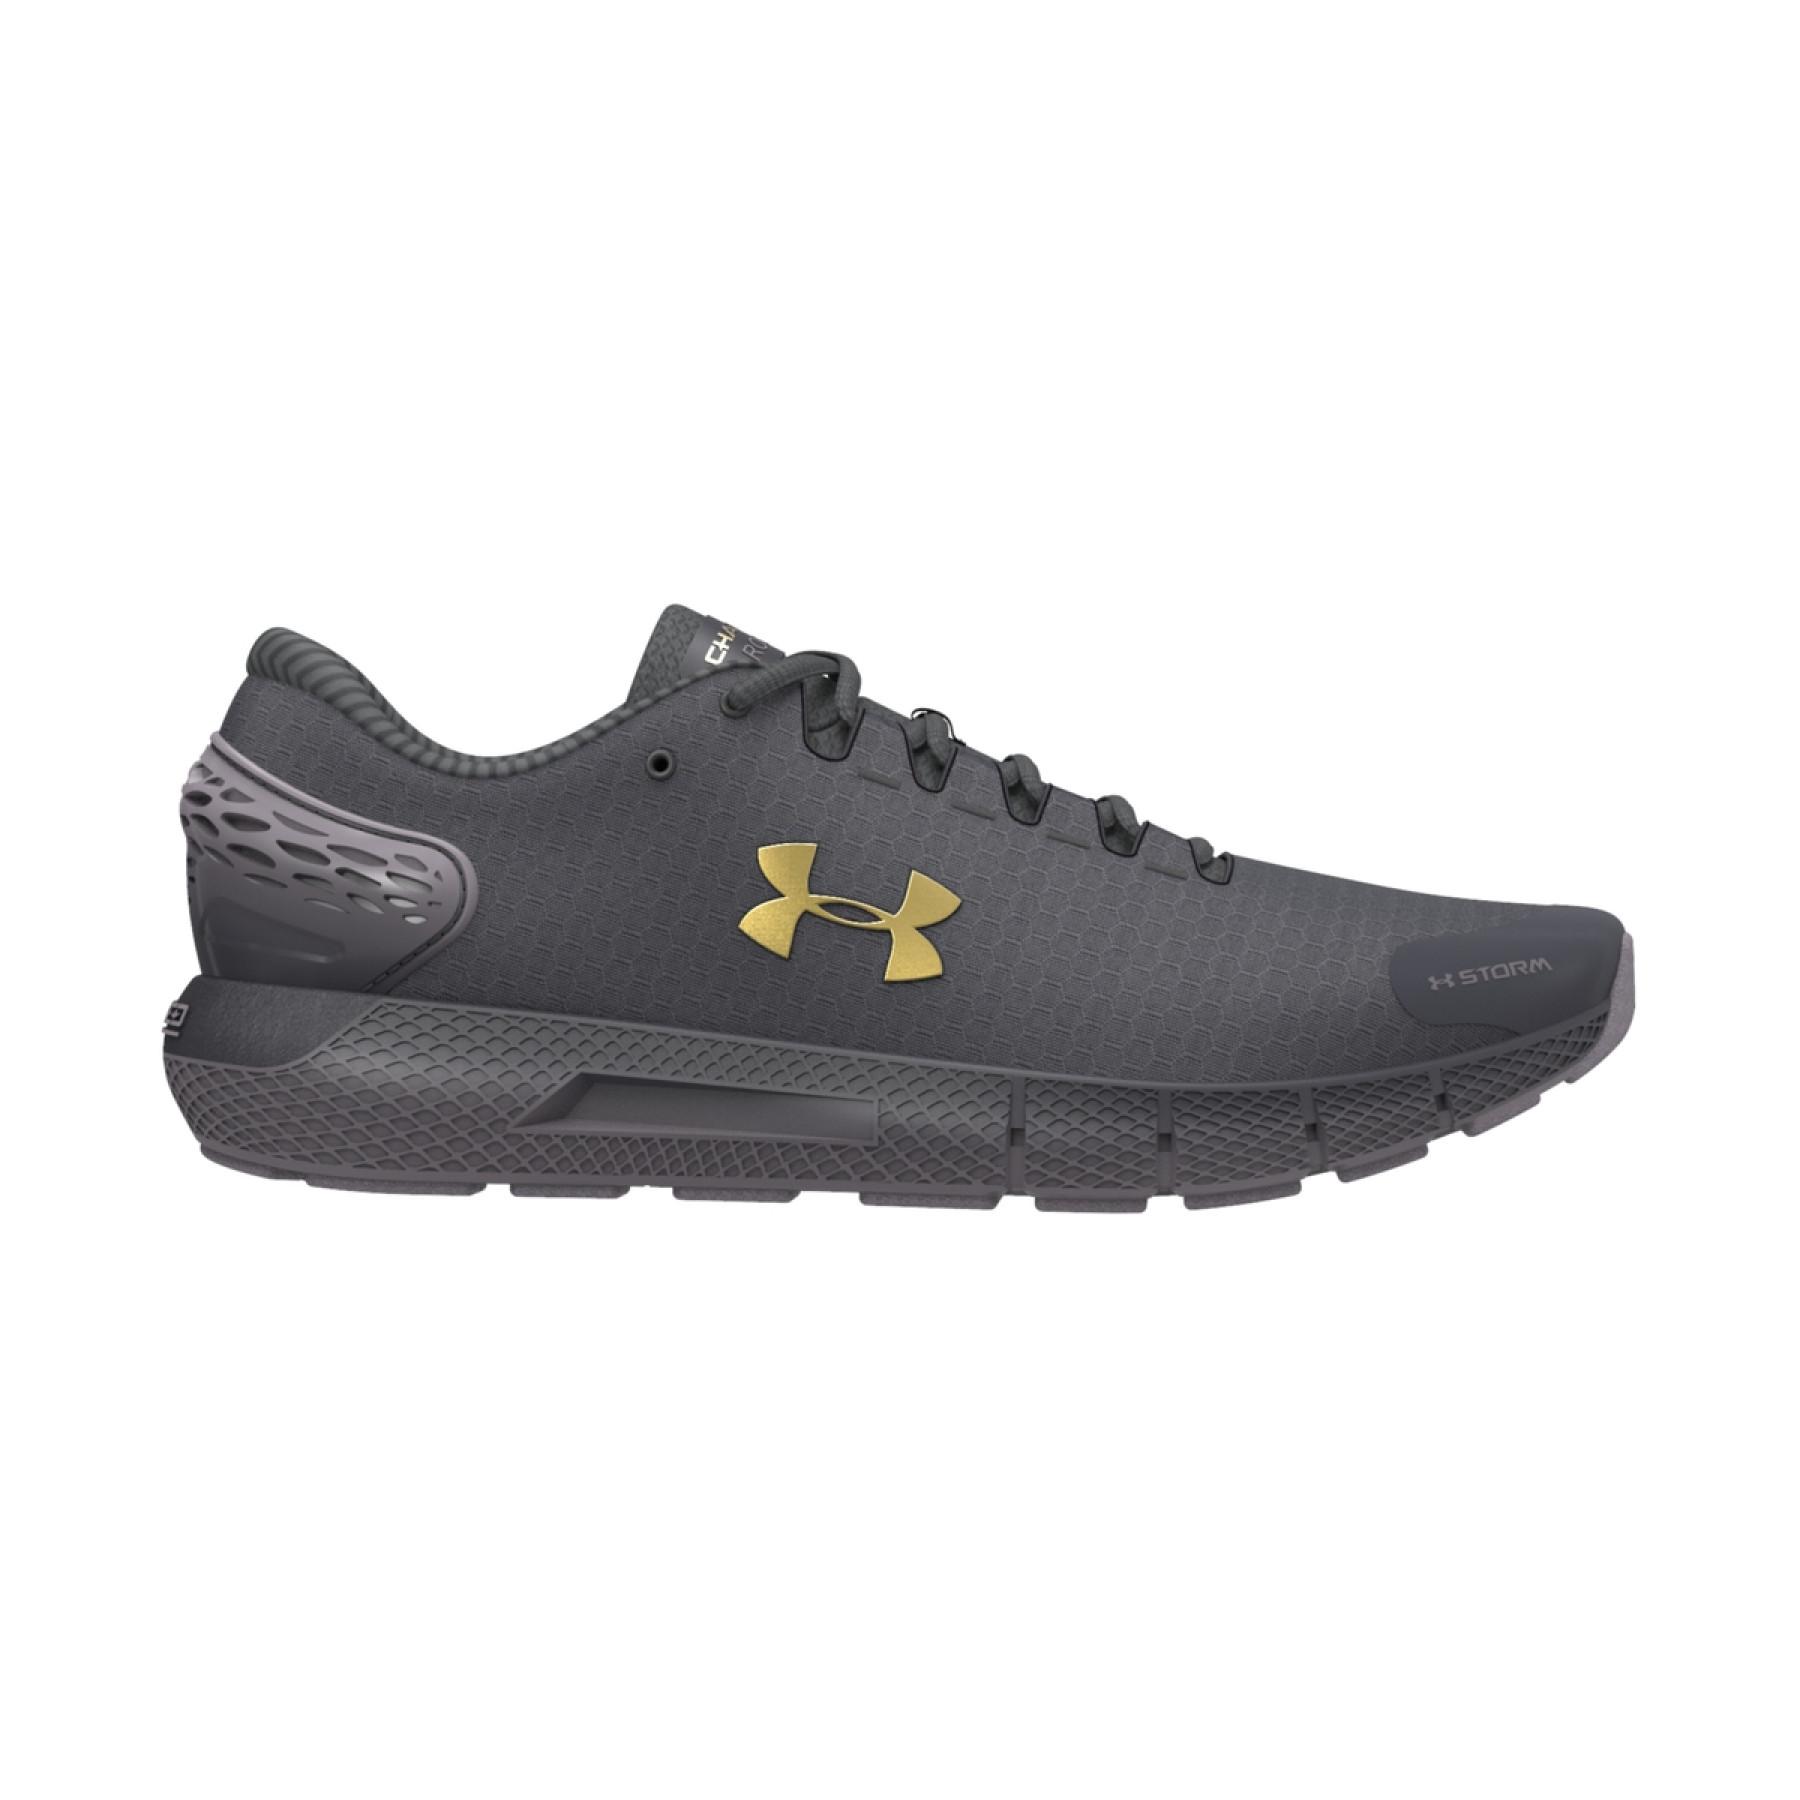 Women's running shoes Under Armour Charged Rogue 2 ColdGear Infrared